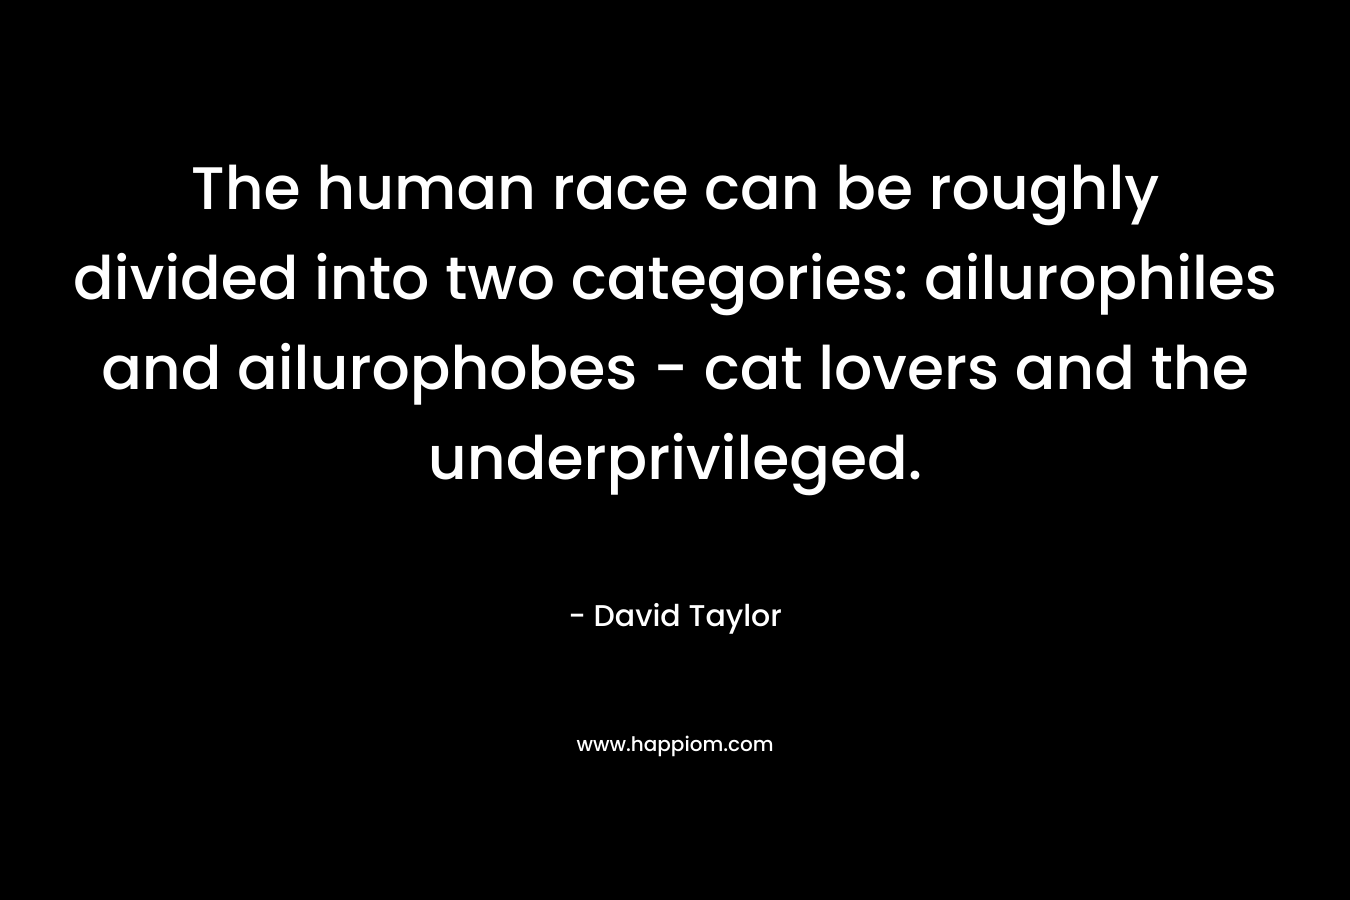 The human race can be roughly divided into two categories: ailurophiles and ailurophobes – cat lovers and the underprivileged. – David Taylor